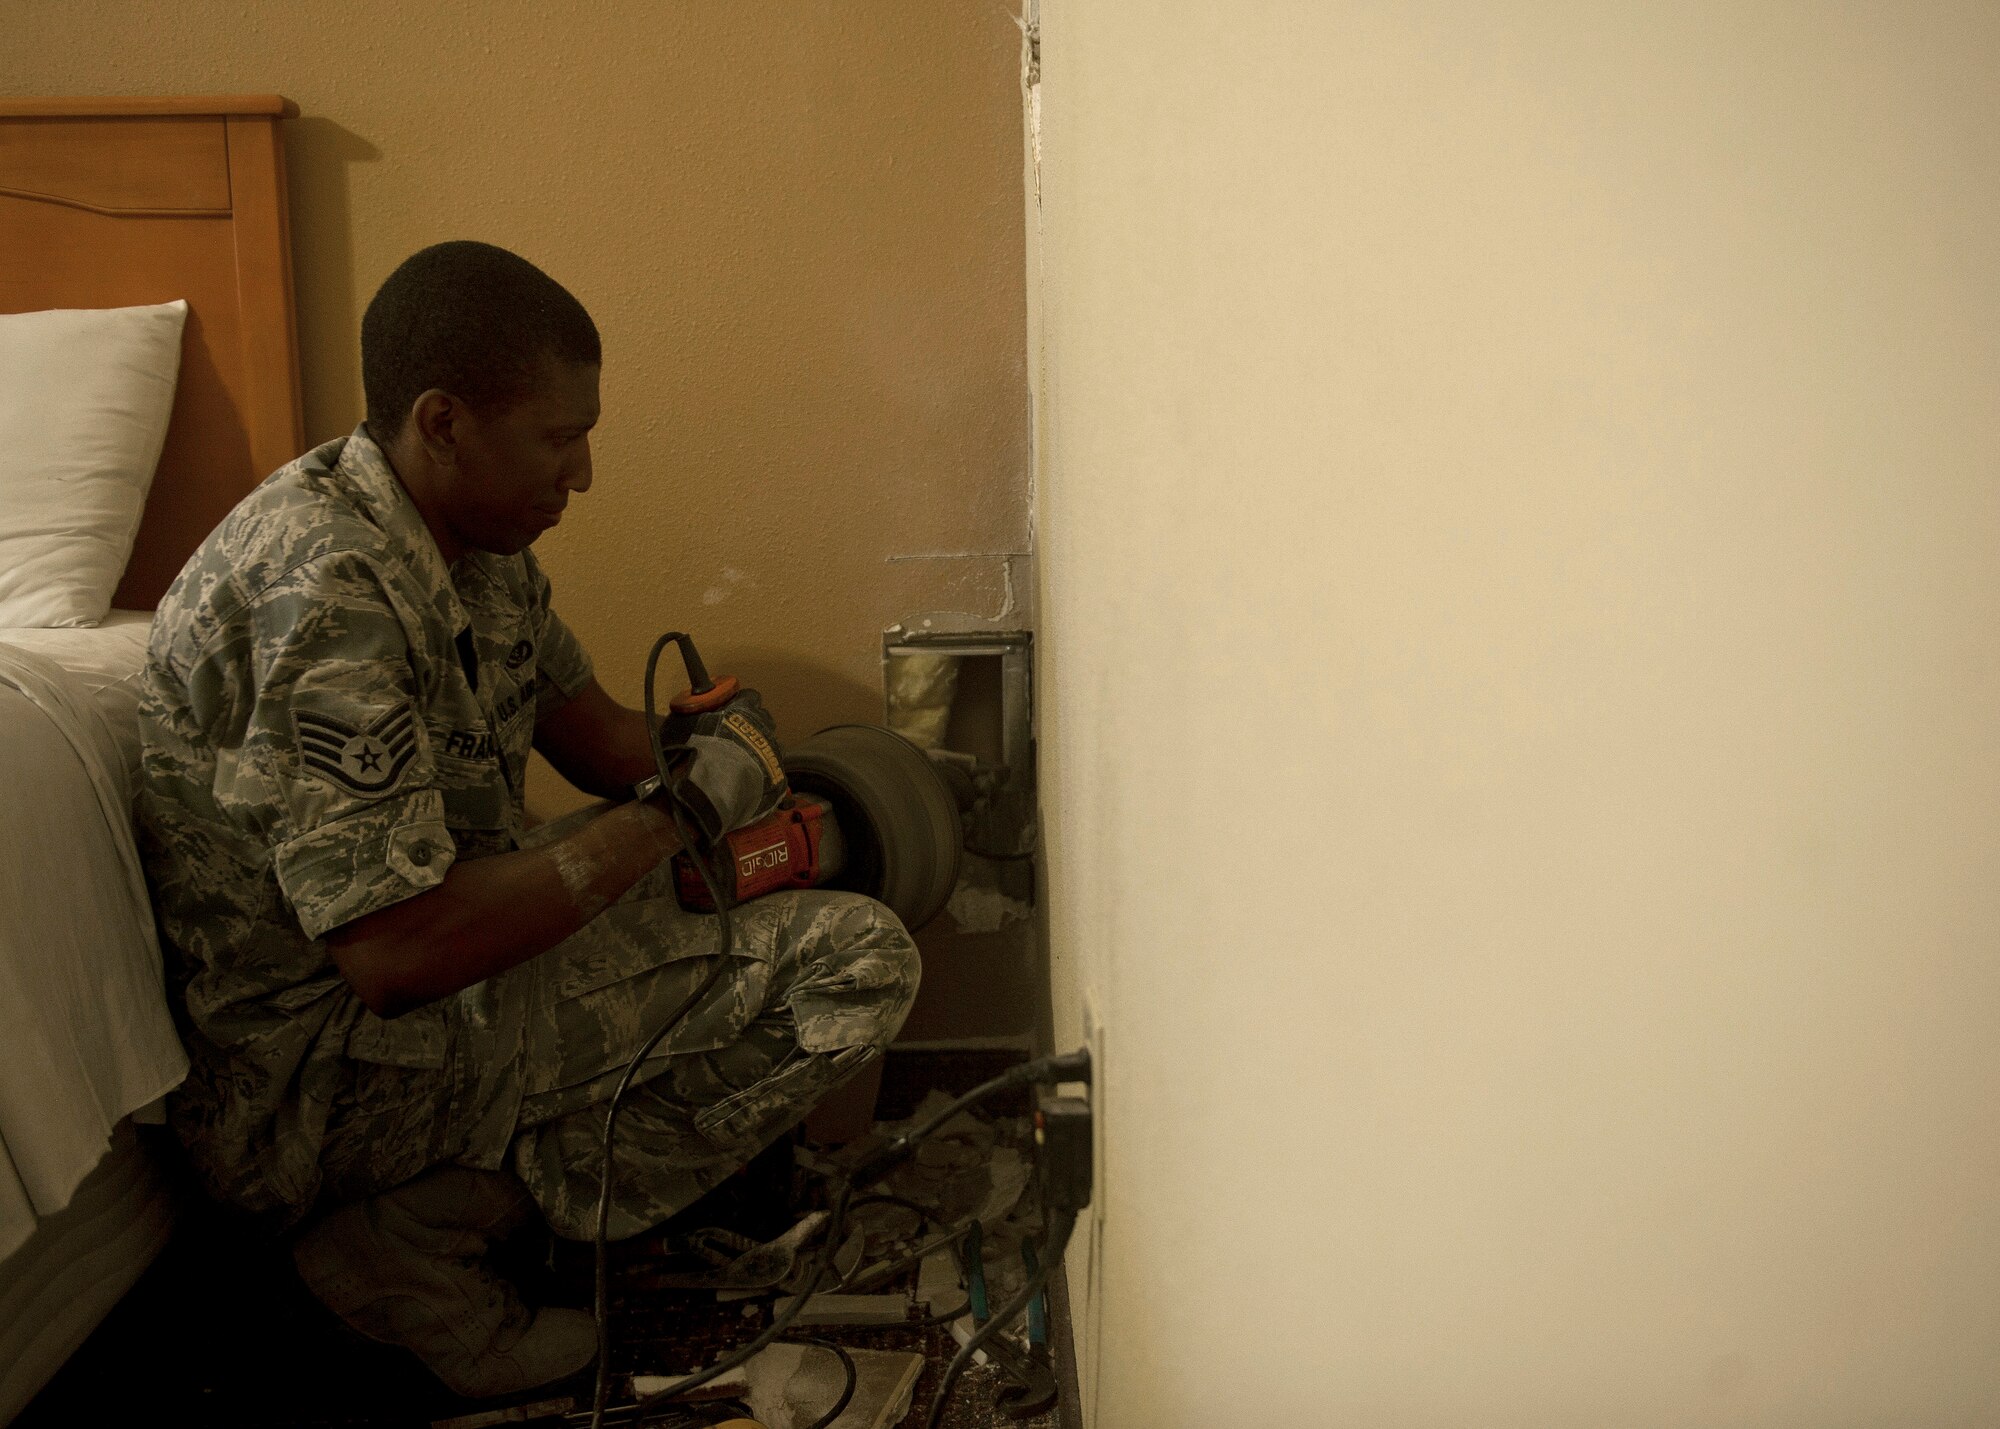 Staff Sgt. Alan Franklin, 99th Civil Engineer Squadron water and fuels systems maintenance craftsman, uses a hand auger, or plumbing snake, to unclog a drain pipe at the Nellis Inn on Nellis Air Force Base, Nev., Aug. 19, 2014. The pipe Franklin was unclogging was the main drain for six other lodging rooms, which were not available for guests to stay in until the clog abated. The water and fuels systems maintenance shop is comprised of approximately 35 Airmen and civilians who work around-the-clock to take care of the base’s fire suppression systems, backflow prevention systems, plumbing systems, and the natural gas hydrants, pipes, tanks and valves. (U.S. Air Force photo by Staff Sgt. Siuta B. Ika)